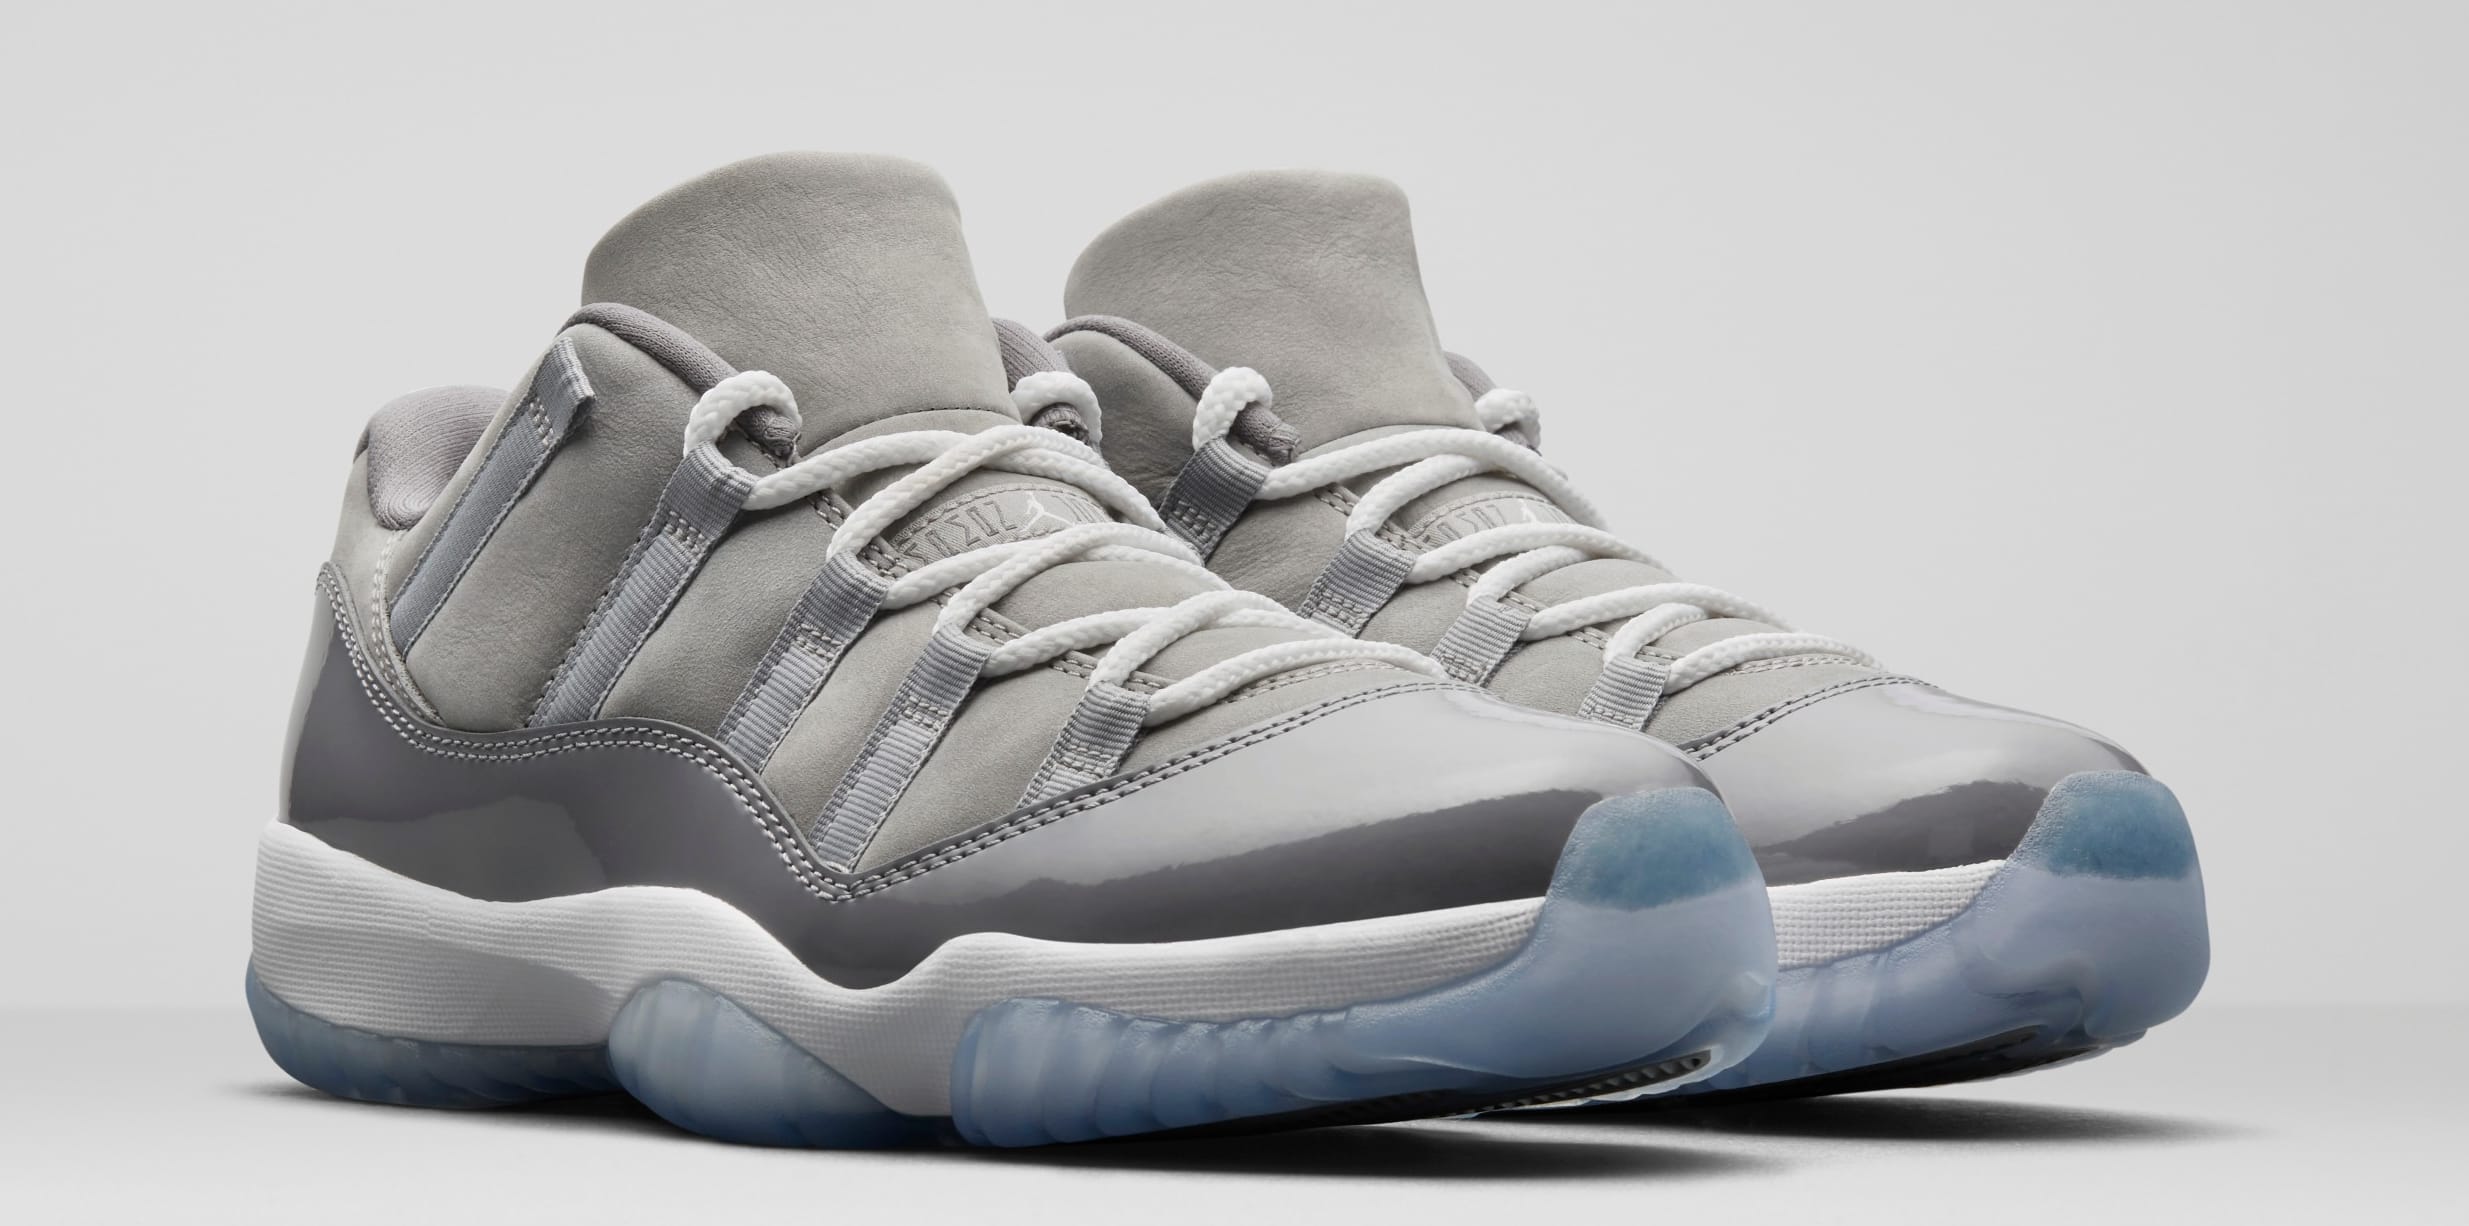 Air XI Low Cool Grey 2018 Release Date | Sole Collector